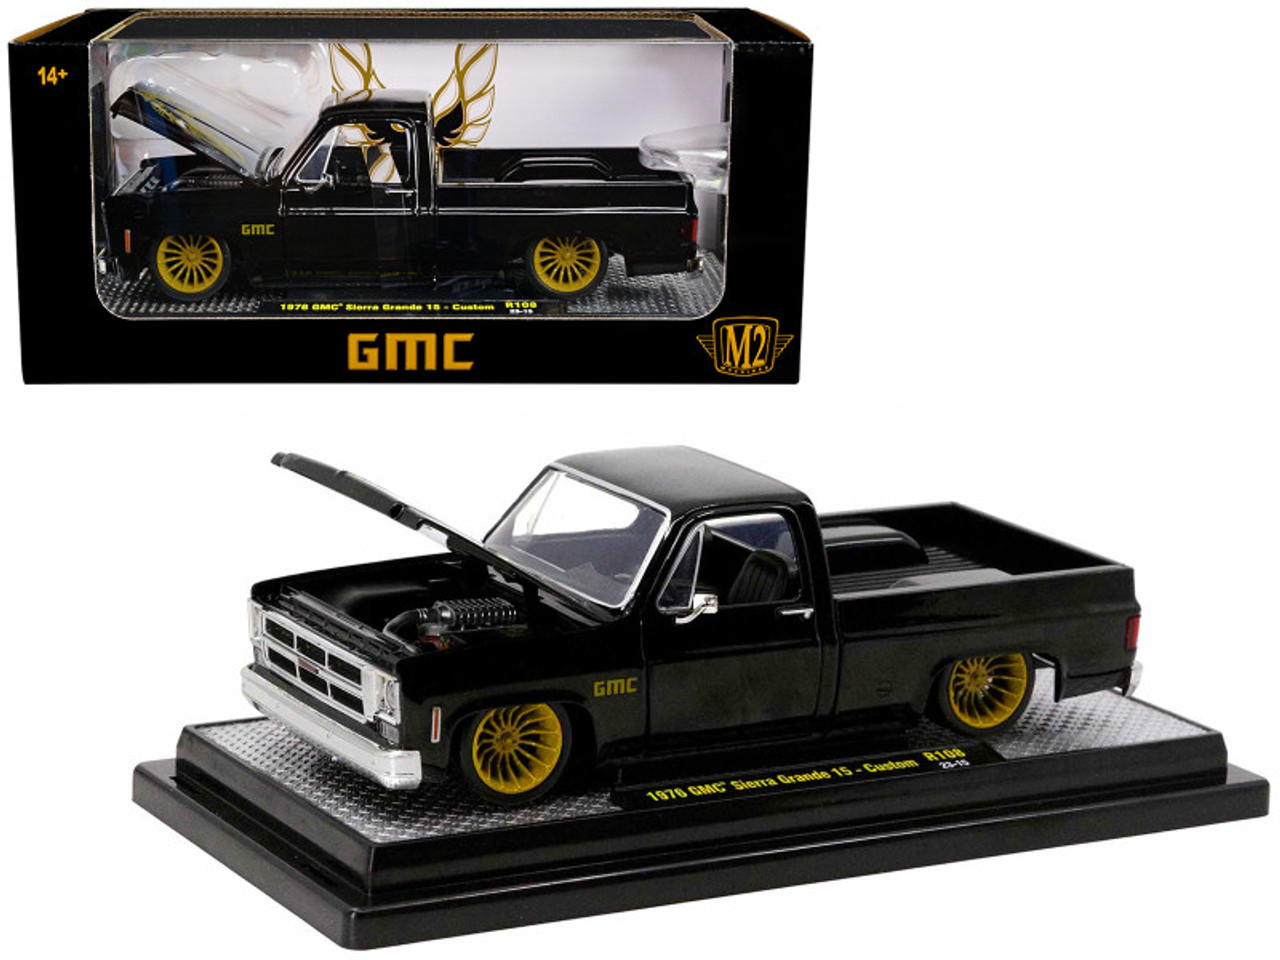 1976 GMC Sierra Grande 15 Custom Pickup Truck Black with Golden Eagle on Hood Limited Edition to 6950 pieces Worldwide 1/24 Diecast Model Car by M2 Machines